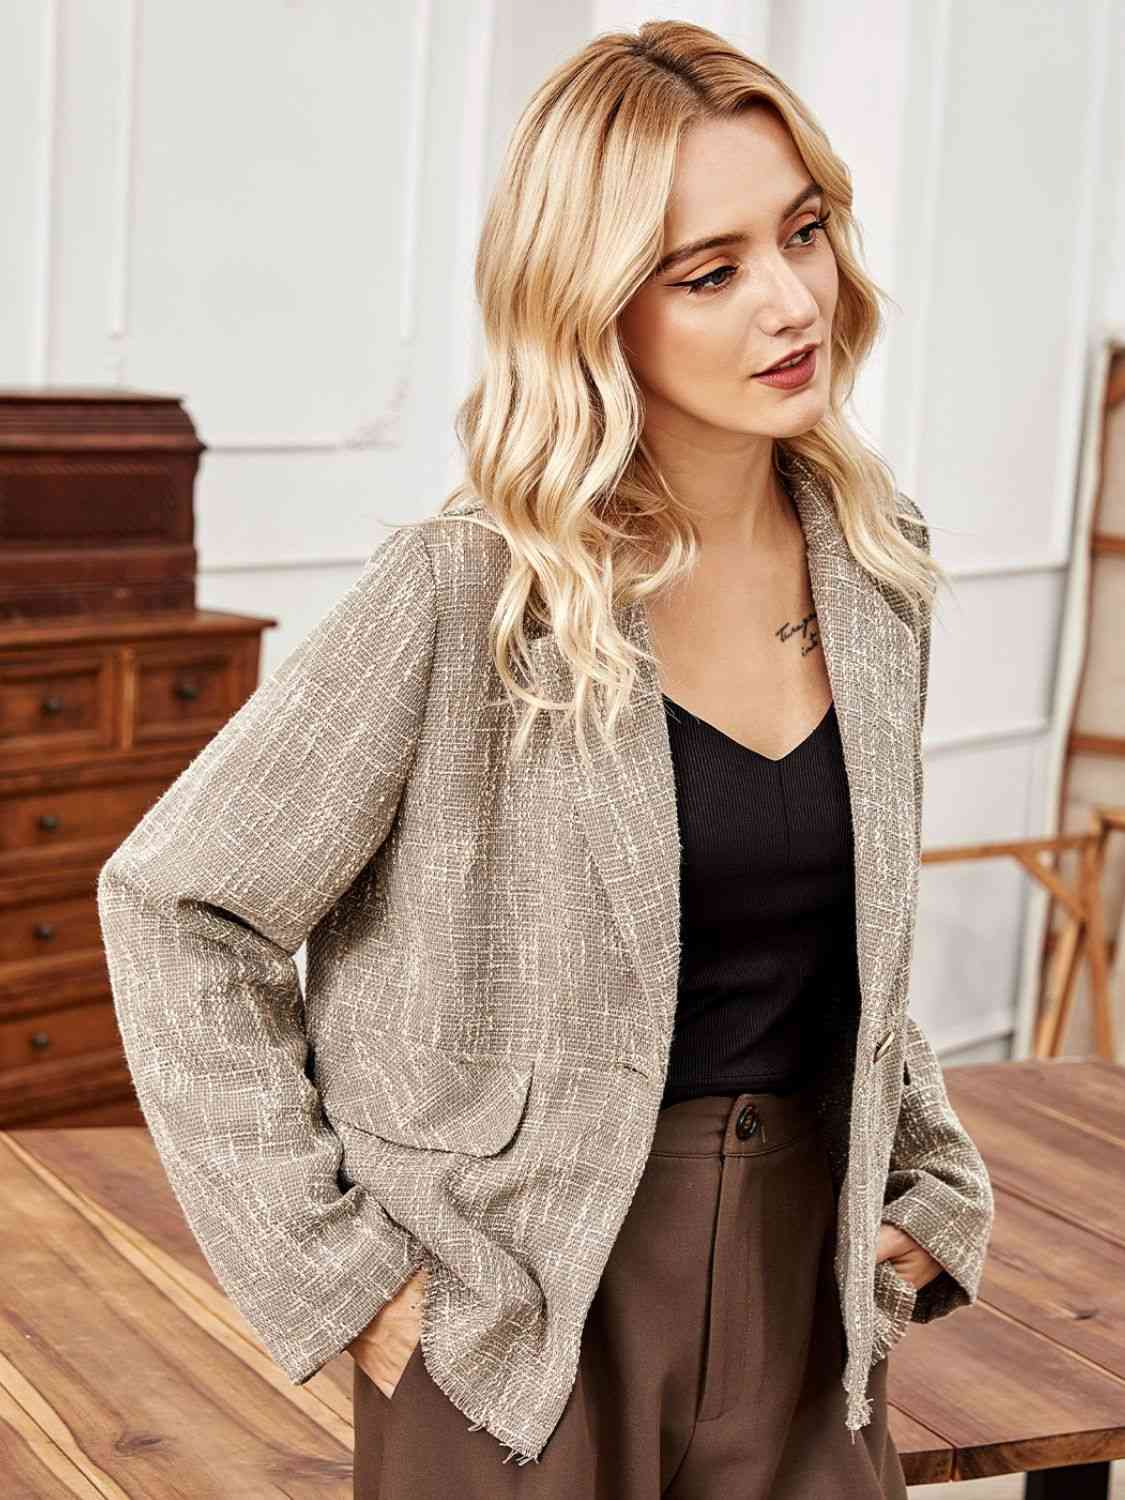 A long sleeve blazer, offering a sophisticated and professional style with its extended sleeves for a polished appearance.